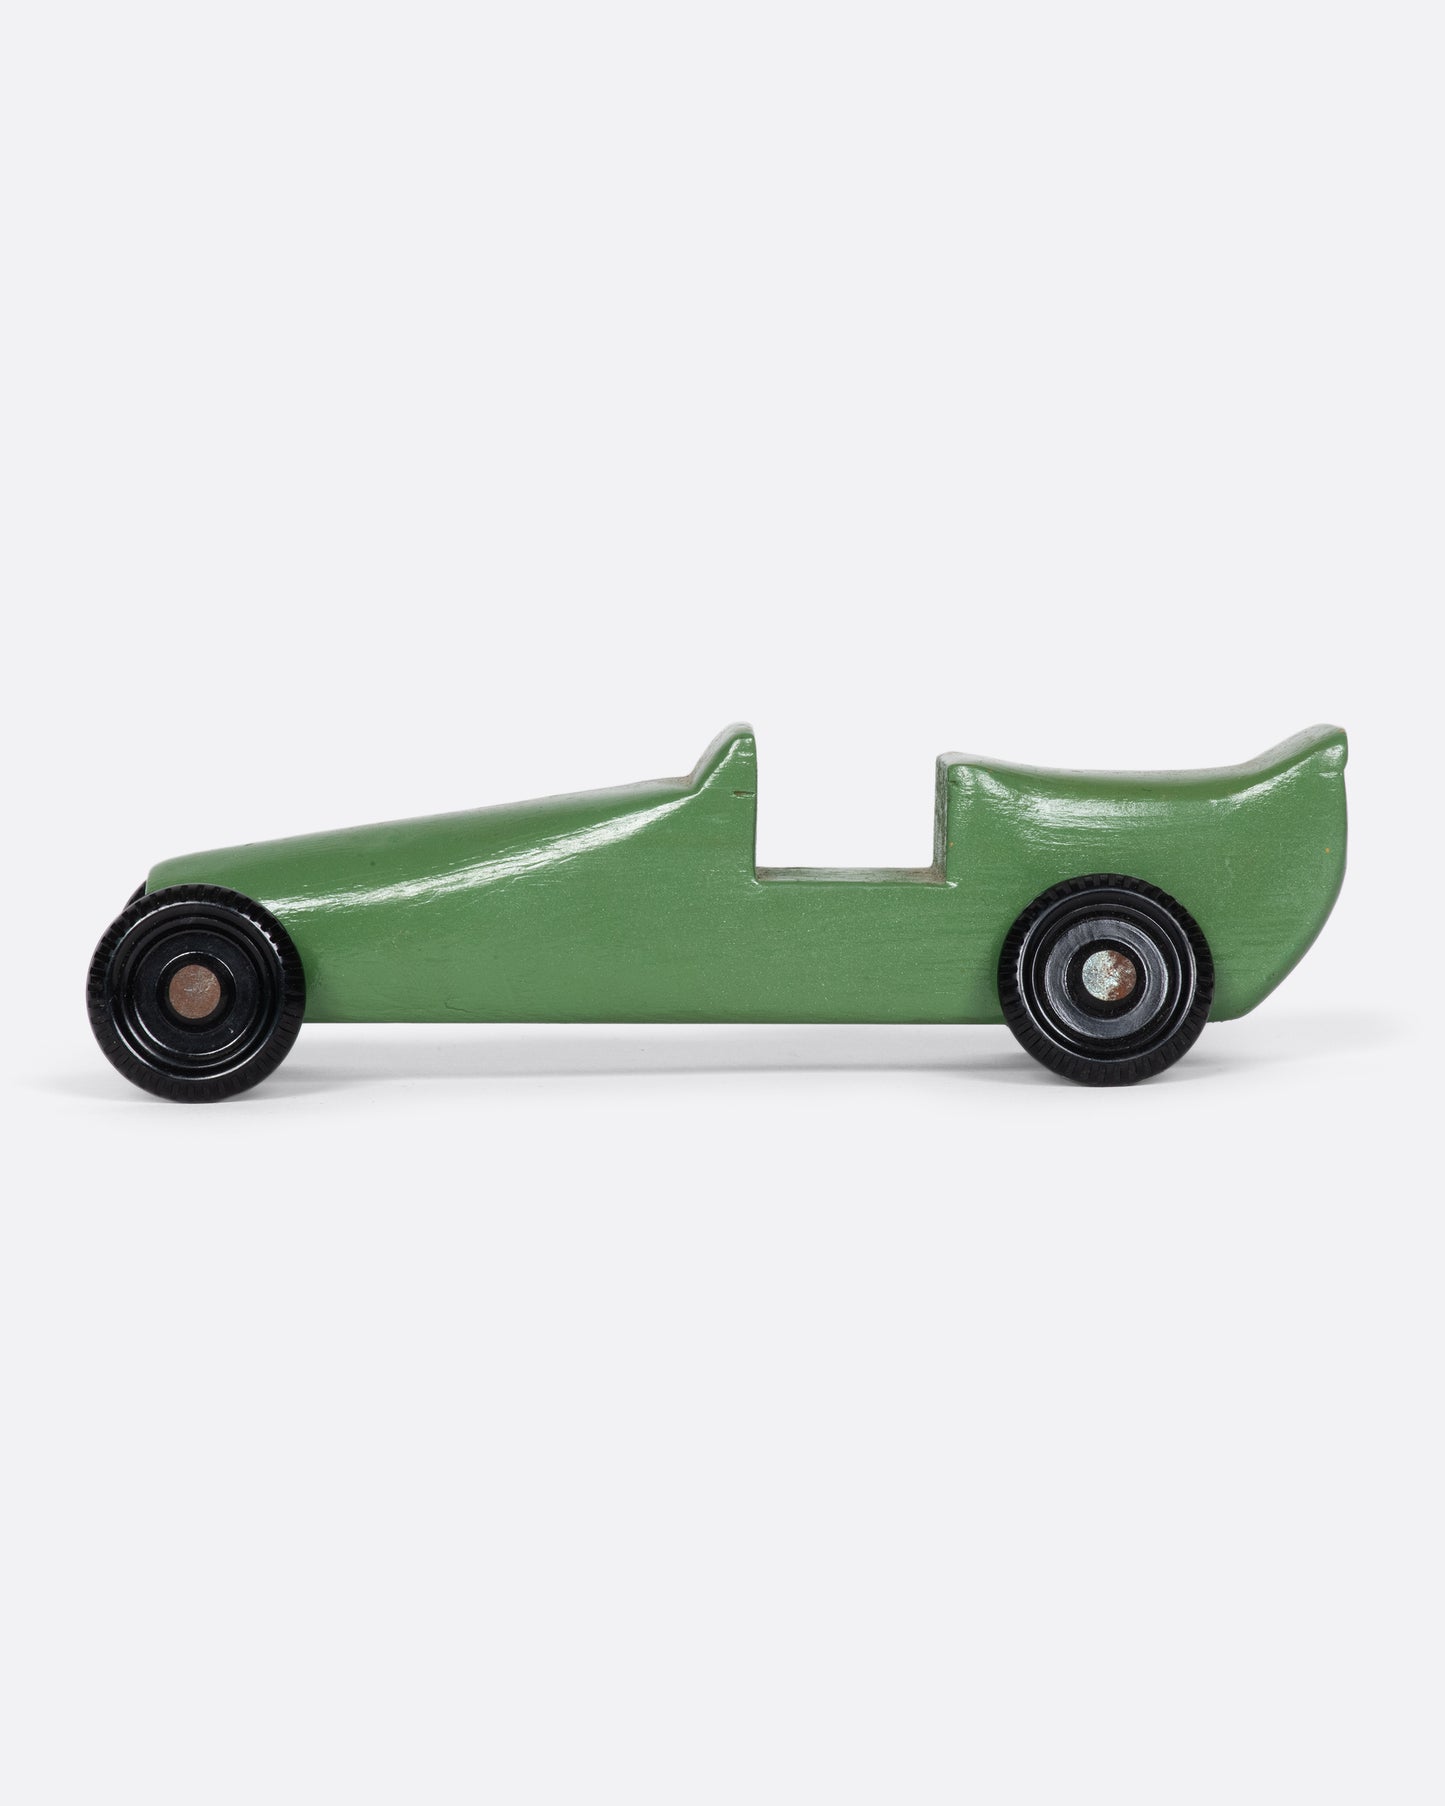 A green wooden toy car with a racing stripe.